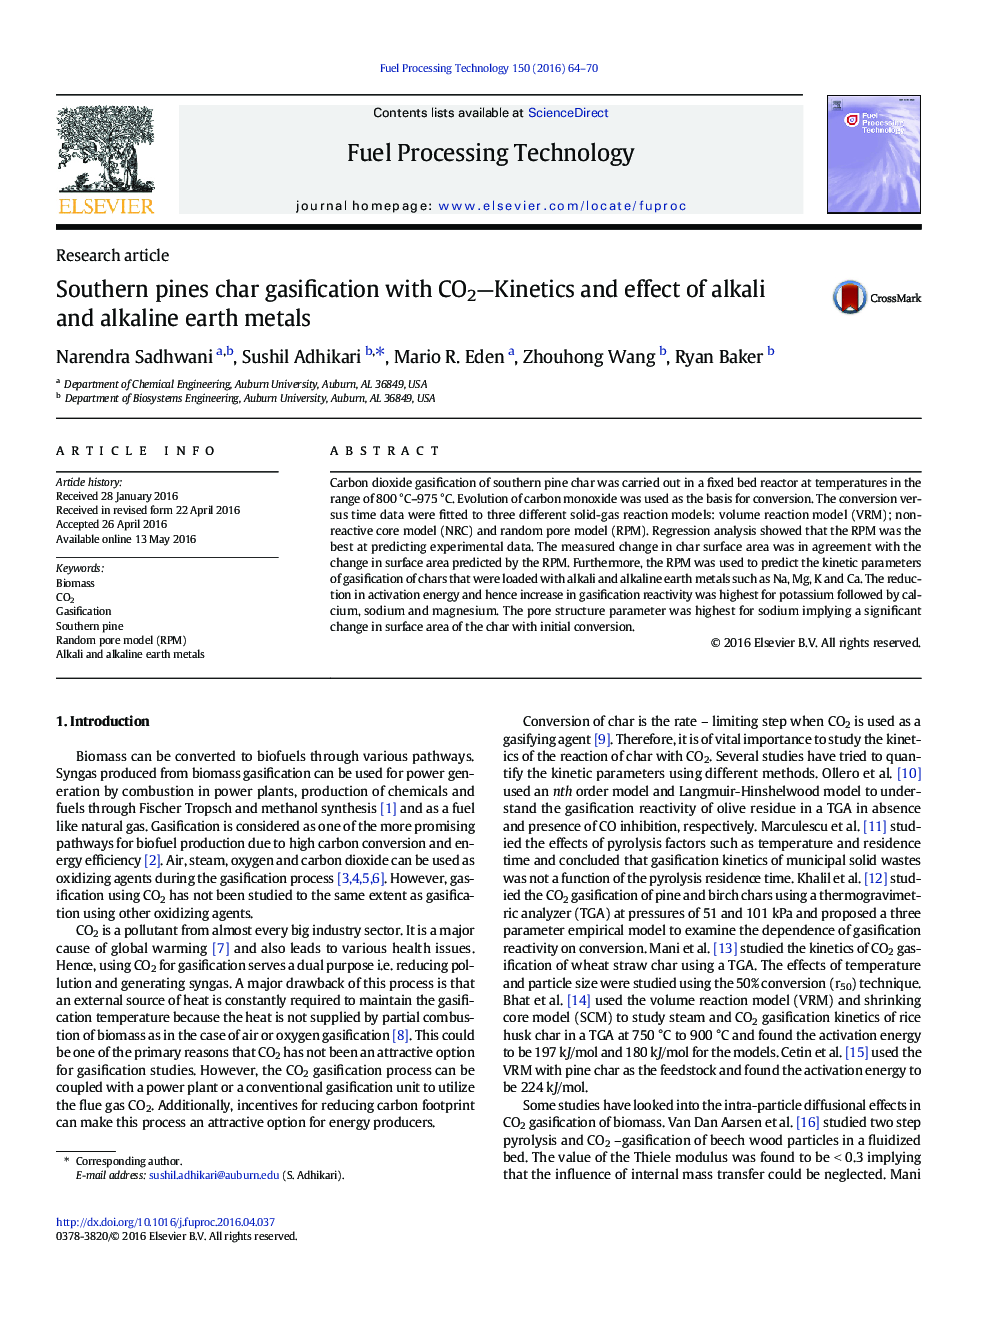 Southern pines char gasification with CO2—Kinetics and effect of alkali and alkaline earth metals